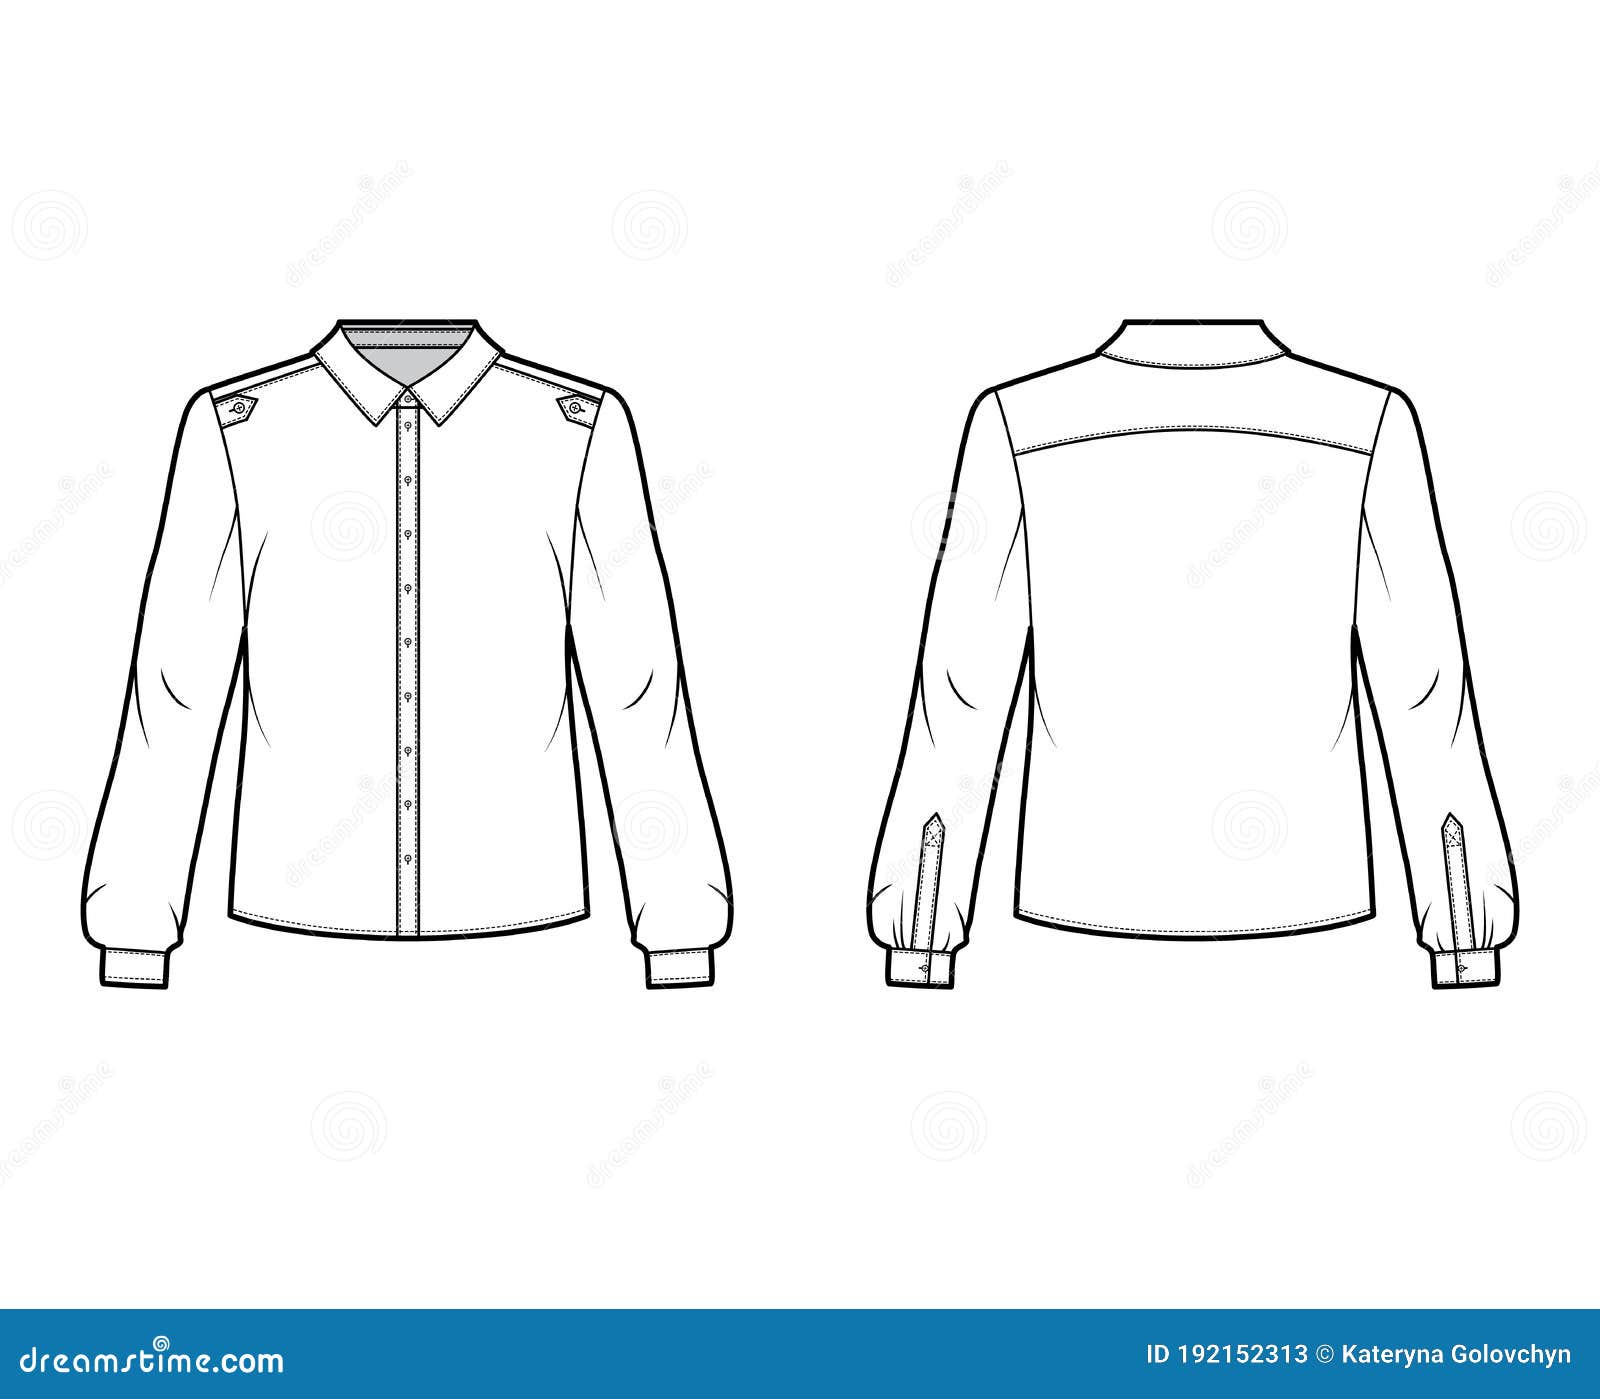 Classic Military Style Shirt Technical Fashion Illustration with ...